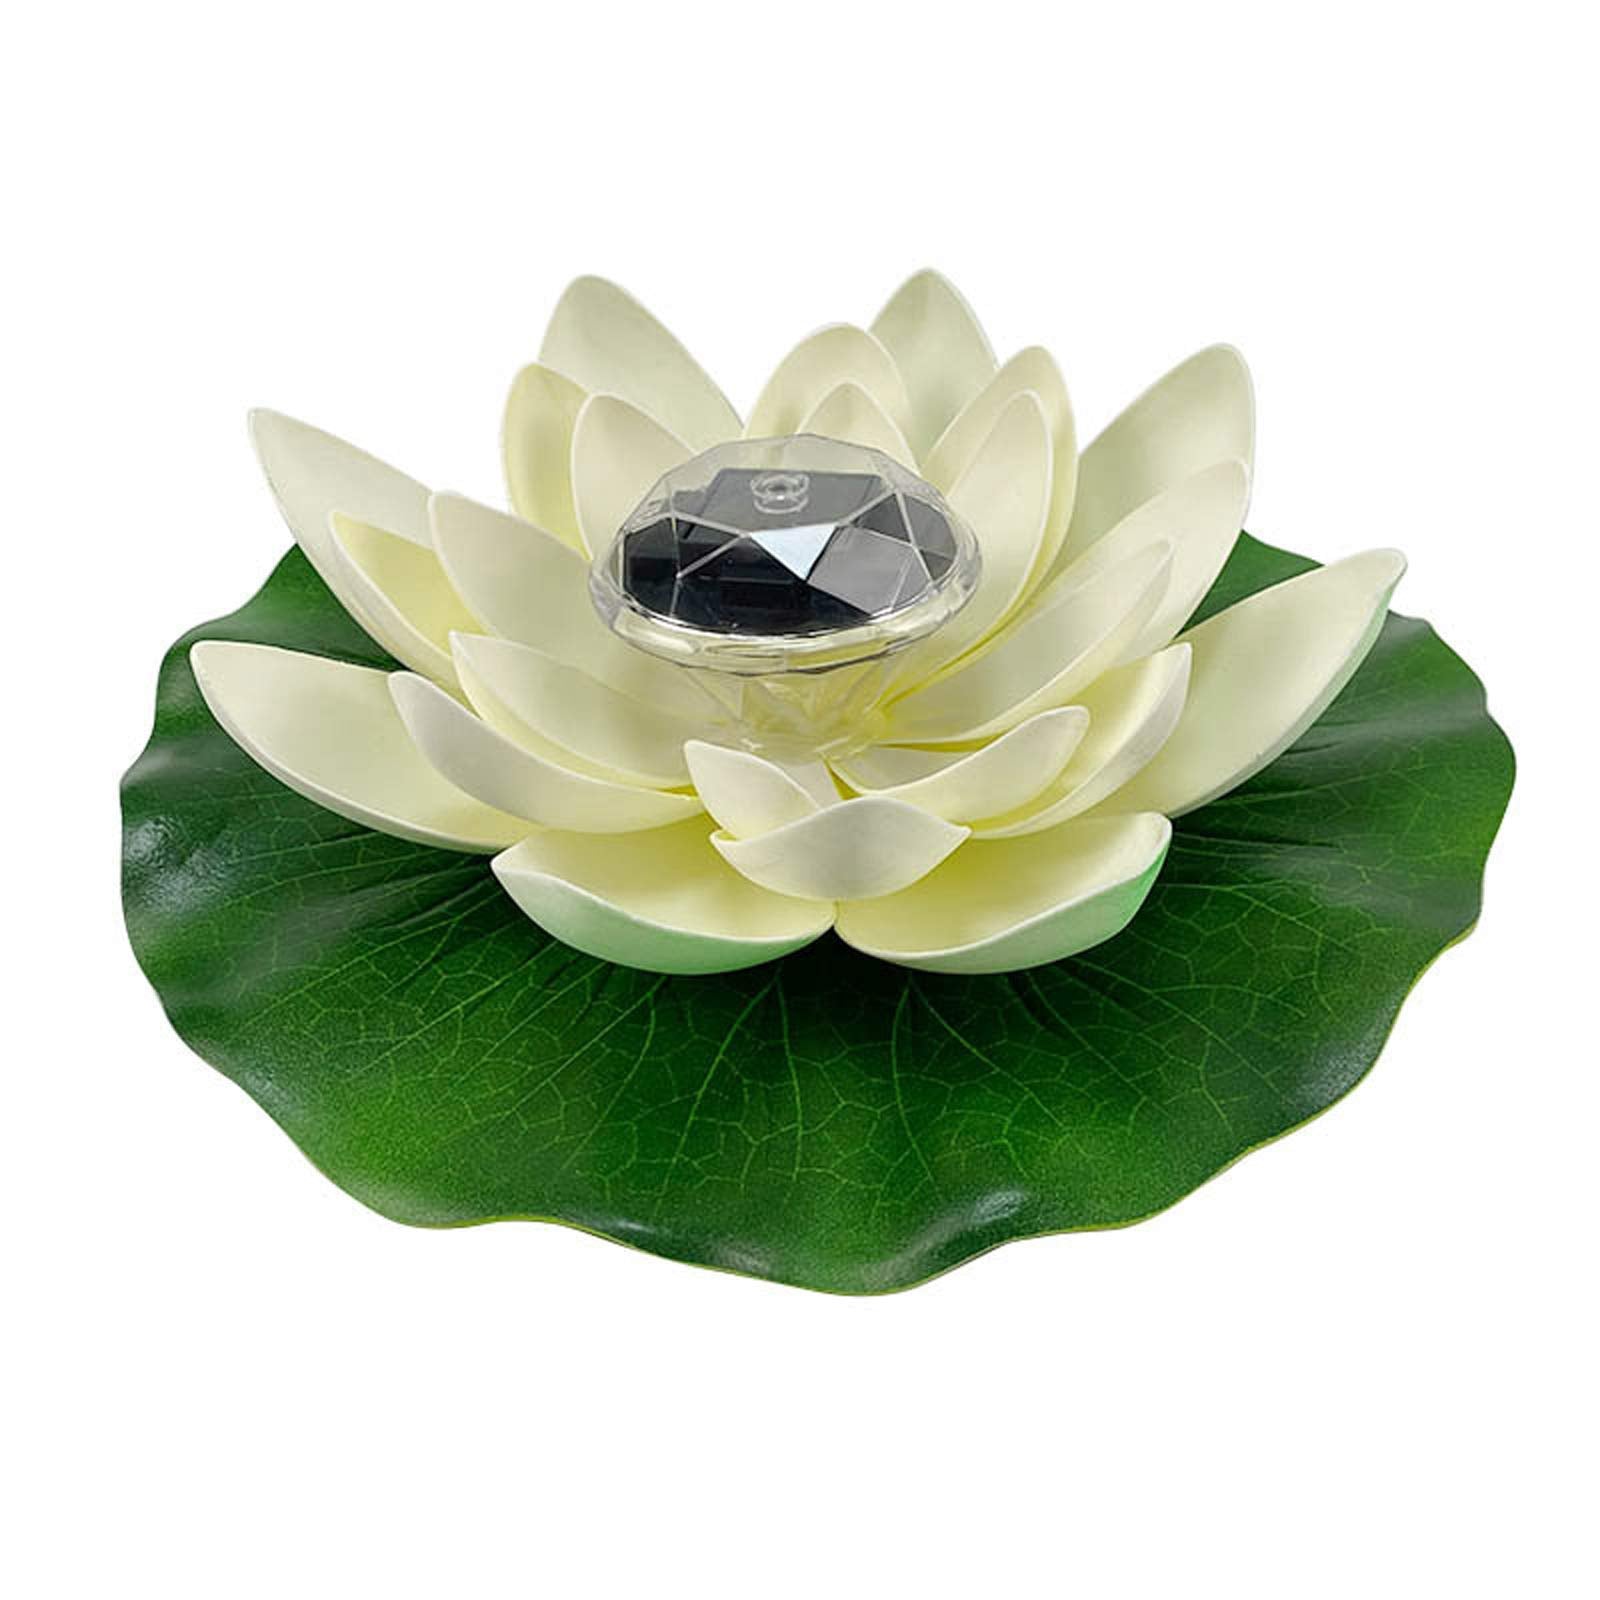 Floating Lotus Light, Solar Powered LED Water Lily Flowers Artificial Flower Night Lamp for Fish Pond Garden Patio Aquarium and Outdoor Pool Decor